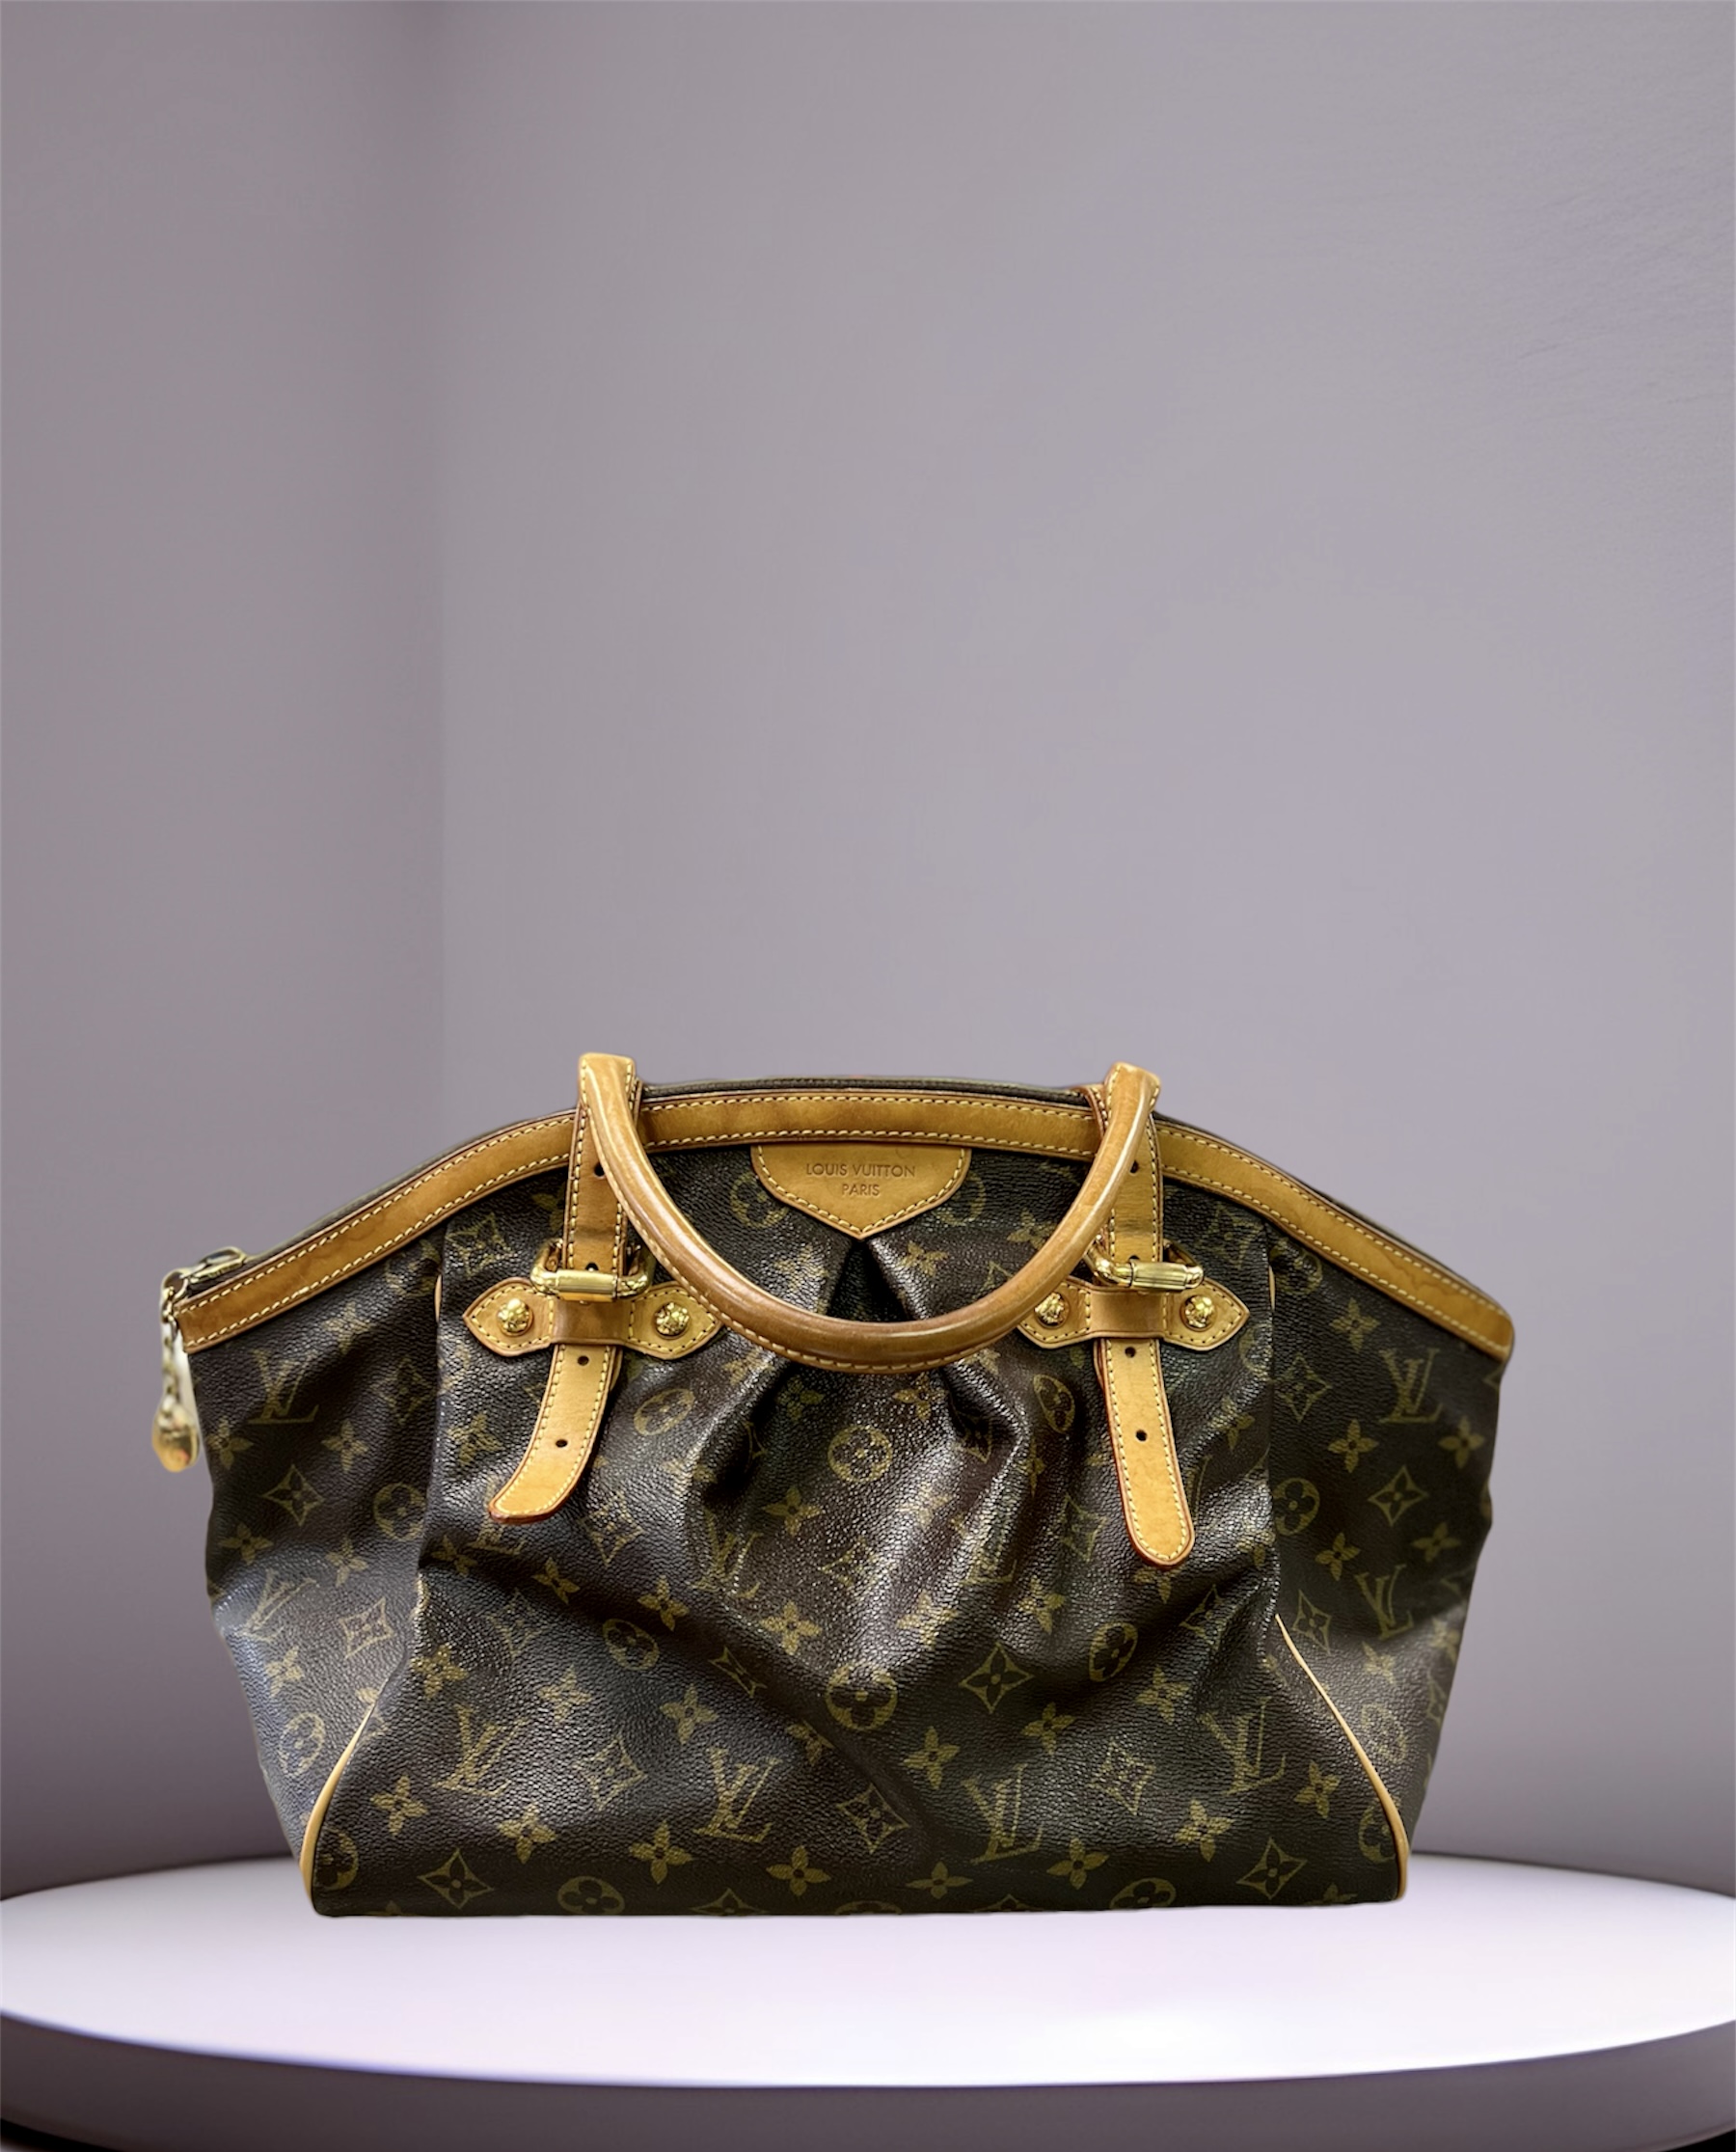 LOUIS VUITTON
MONOGRAM CANVAS TIVOLI GM
Spacious carry-all Tivoli bag from Louis Vuitton rendered in the house's iconic Monogram coated canvas, trimmed with natural Vachetta leather and finished in gold-tone brass hardware.
Features:
Two Rolled Leather Shoulder Straps
Top Zip Closure
Two Interior Slip And Single Pouch Pockets
Coated Canvas
Canvas Lining
Gold Hardware
Details:
Length: 13\" (33 cm)
Height: 11.5\" (29 cm)
Depth: 7\" (17 cm)
Strap Drop: 7\" (17 cm)
Date Code: SP3069
COMES with CERTIFICATE of AUTHENTICITY
This bag is preloved and is good condition.  The coated canvas is in excellent condition, the leather does show signs of wear.  The interior is spotless and clean with no odor.
\"What comes Around Goes Around\"  has this bag in similar condition for 1412.00,  \"Bag Borrow Steal\" has it for 1300.00 and \"Atlanta Luxury Bags\" as this bag for $895.00 in much worst condition.